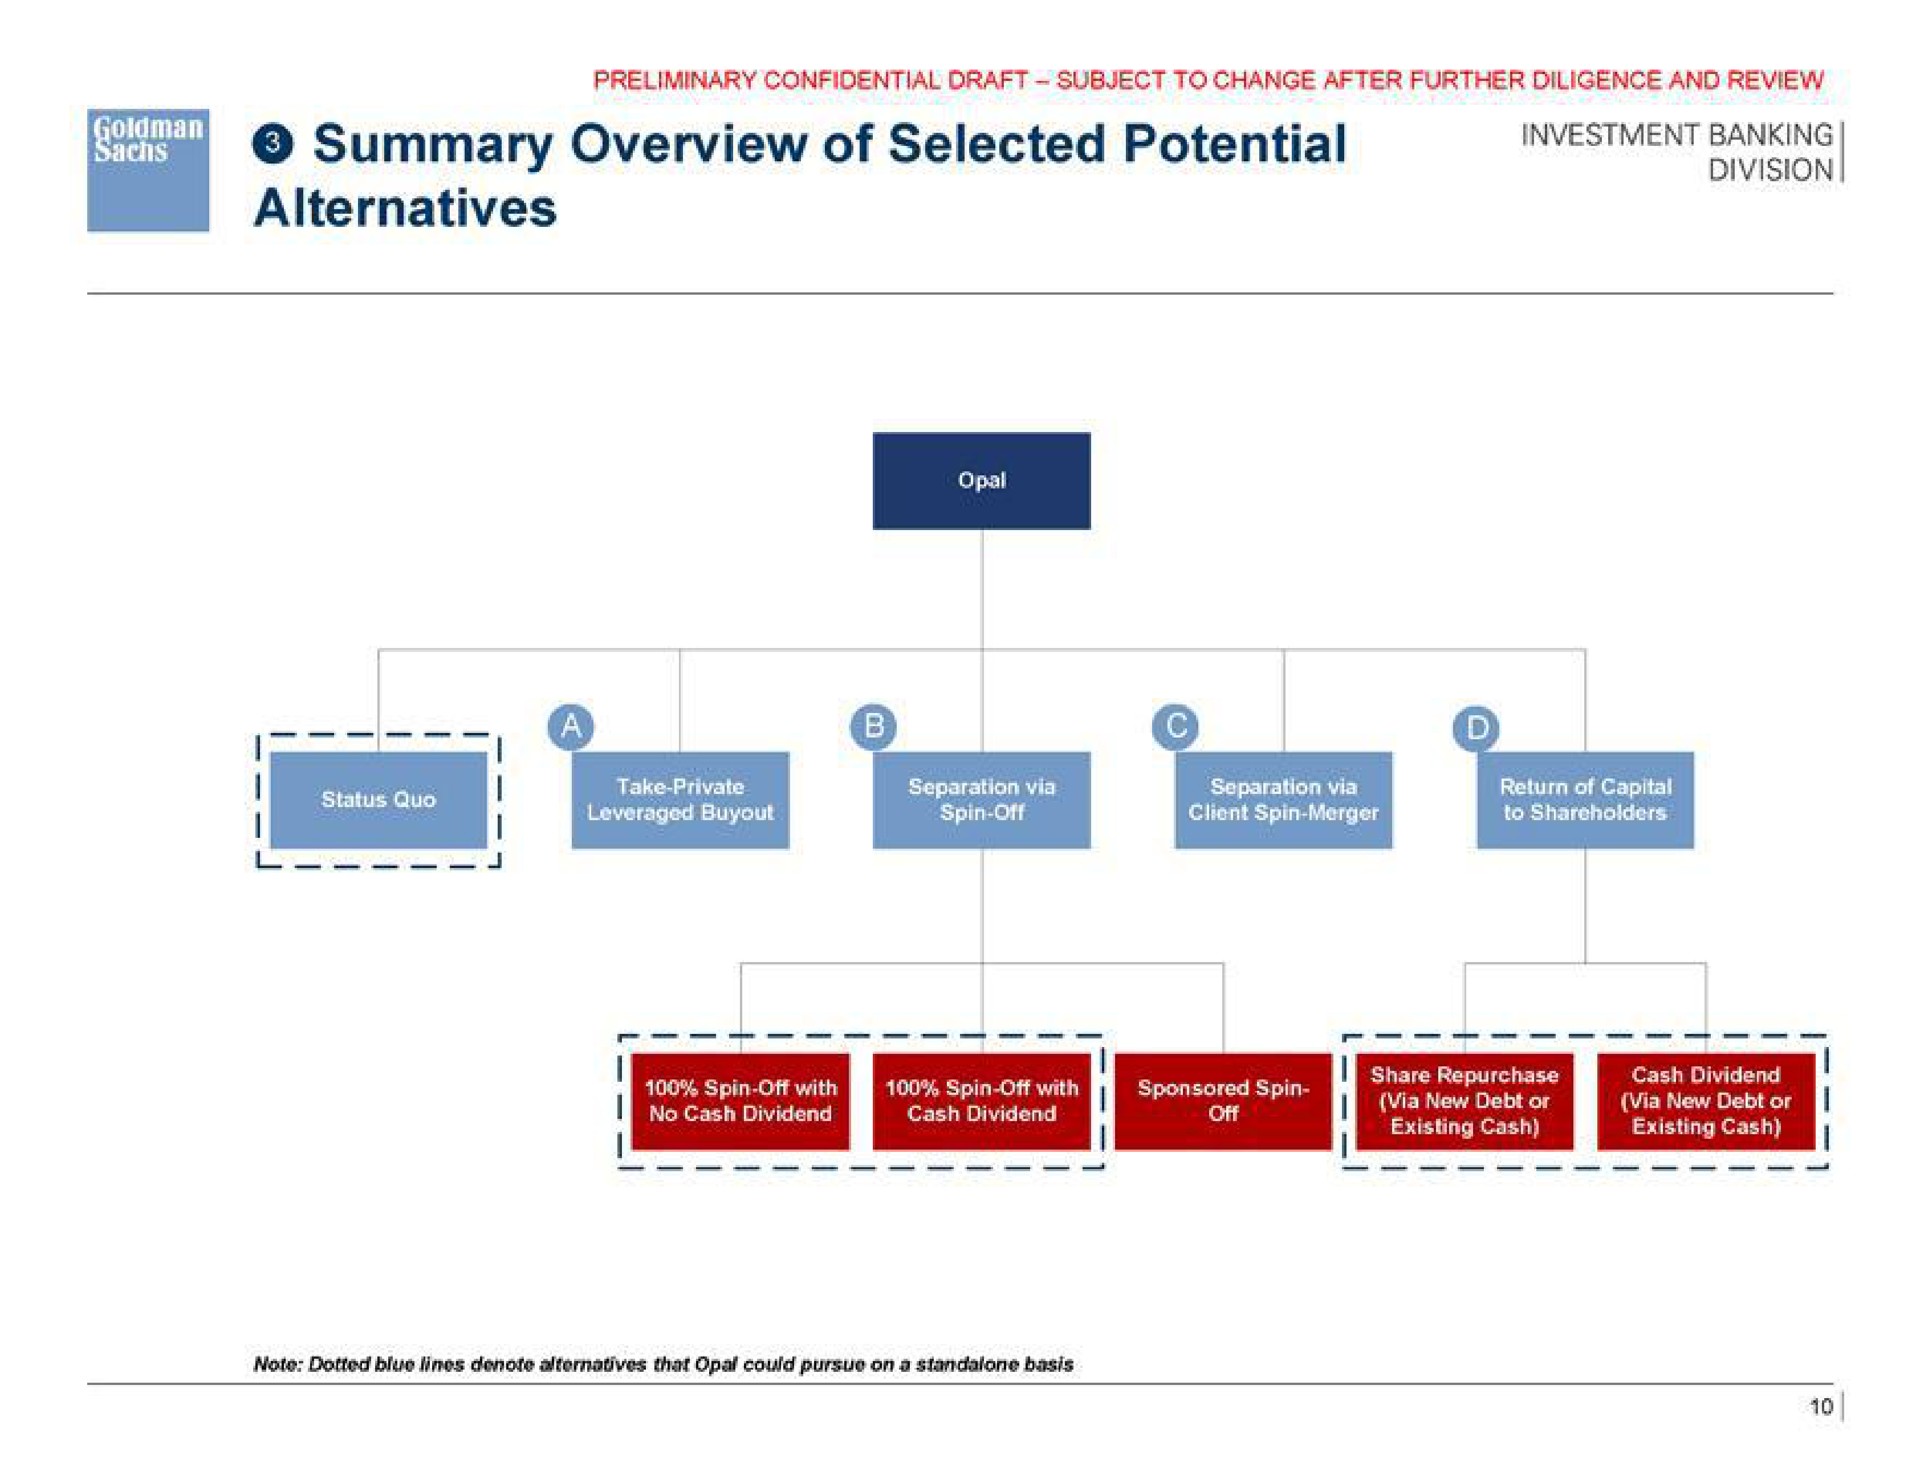 summary overview of selected potential alternatives | Goldman Sachs